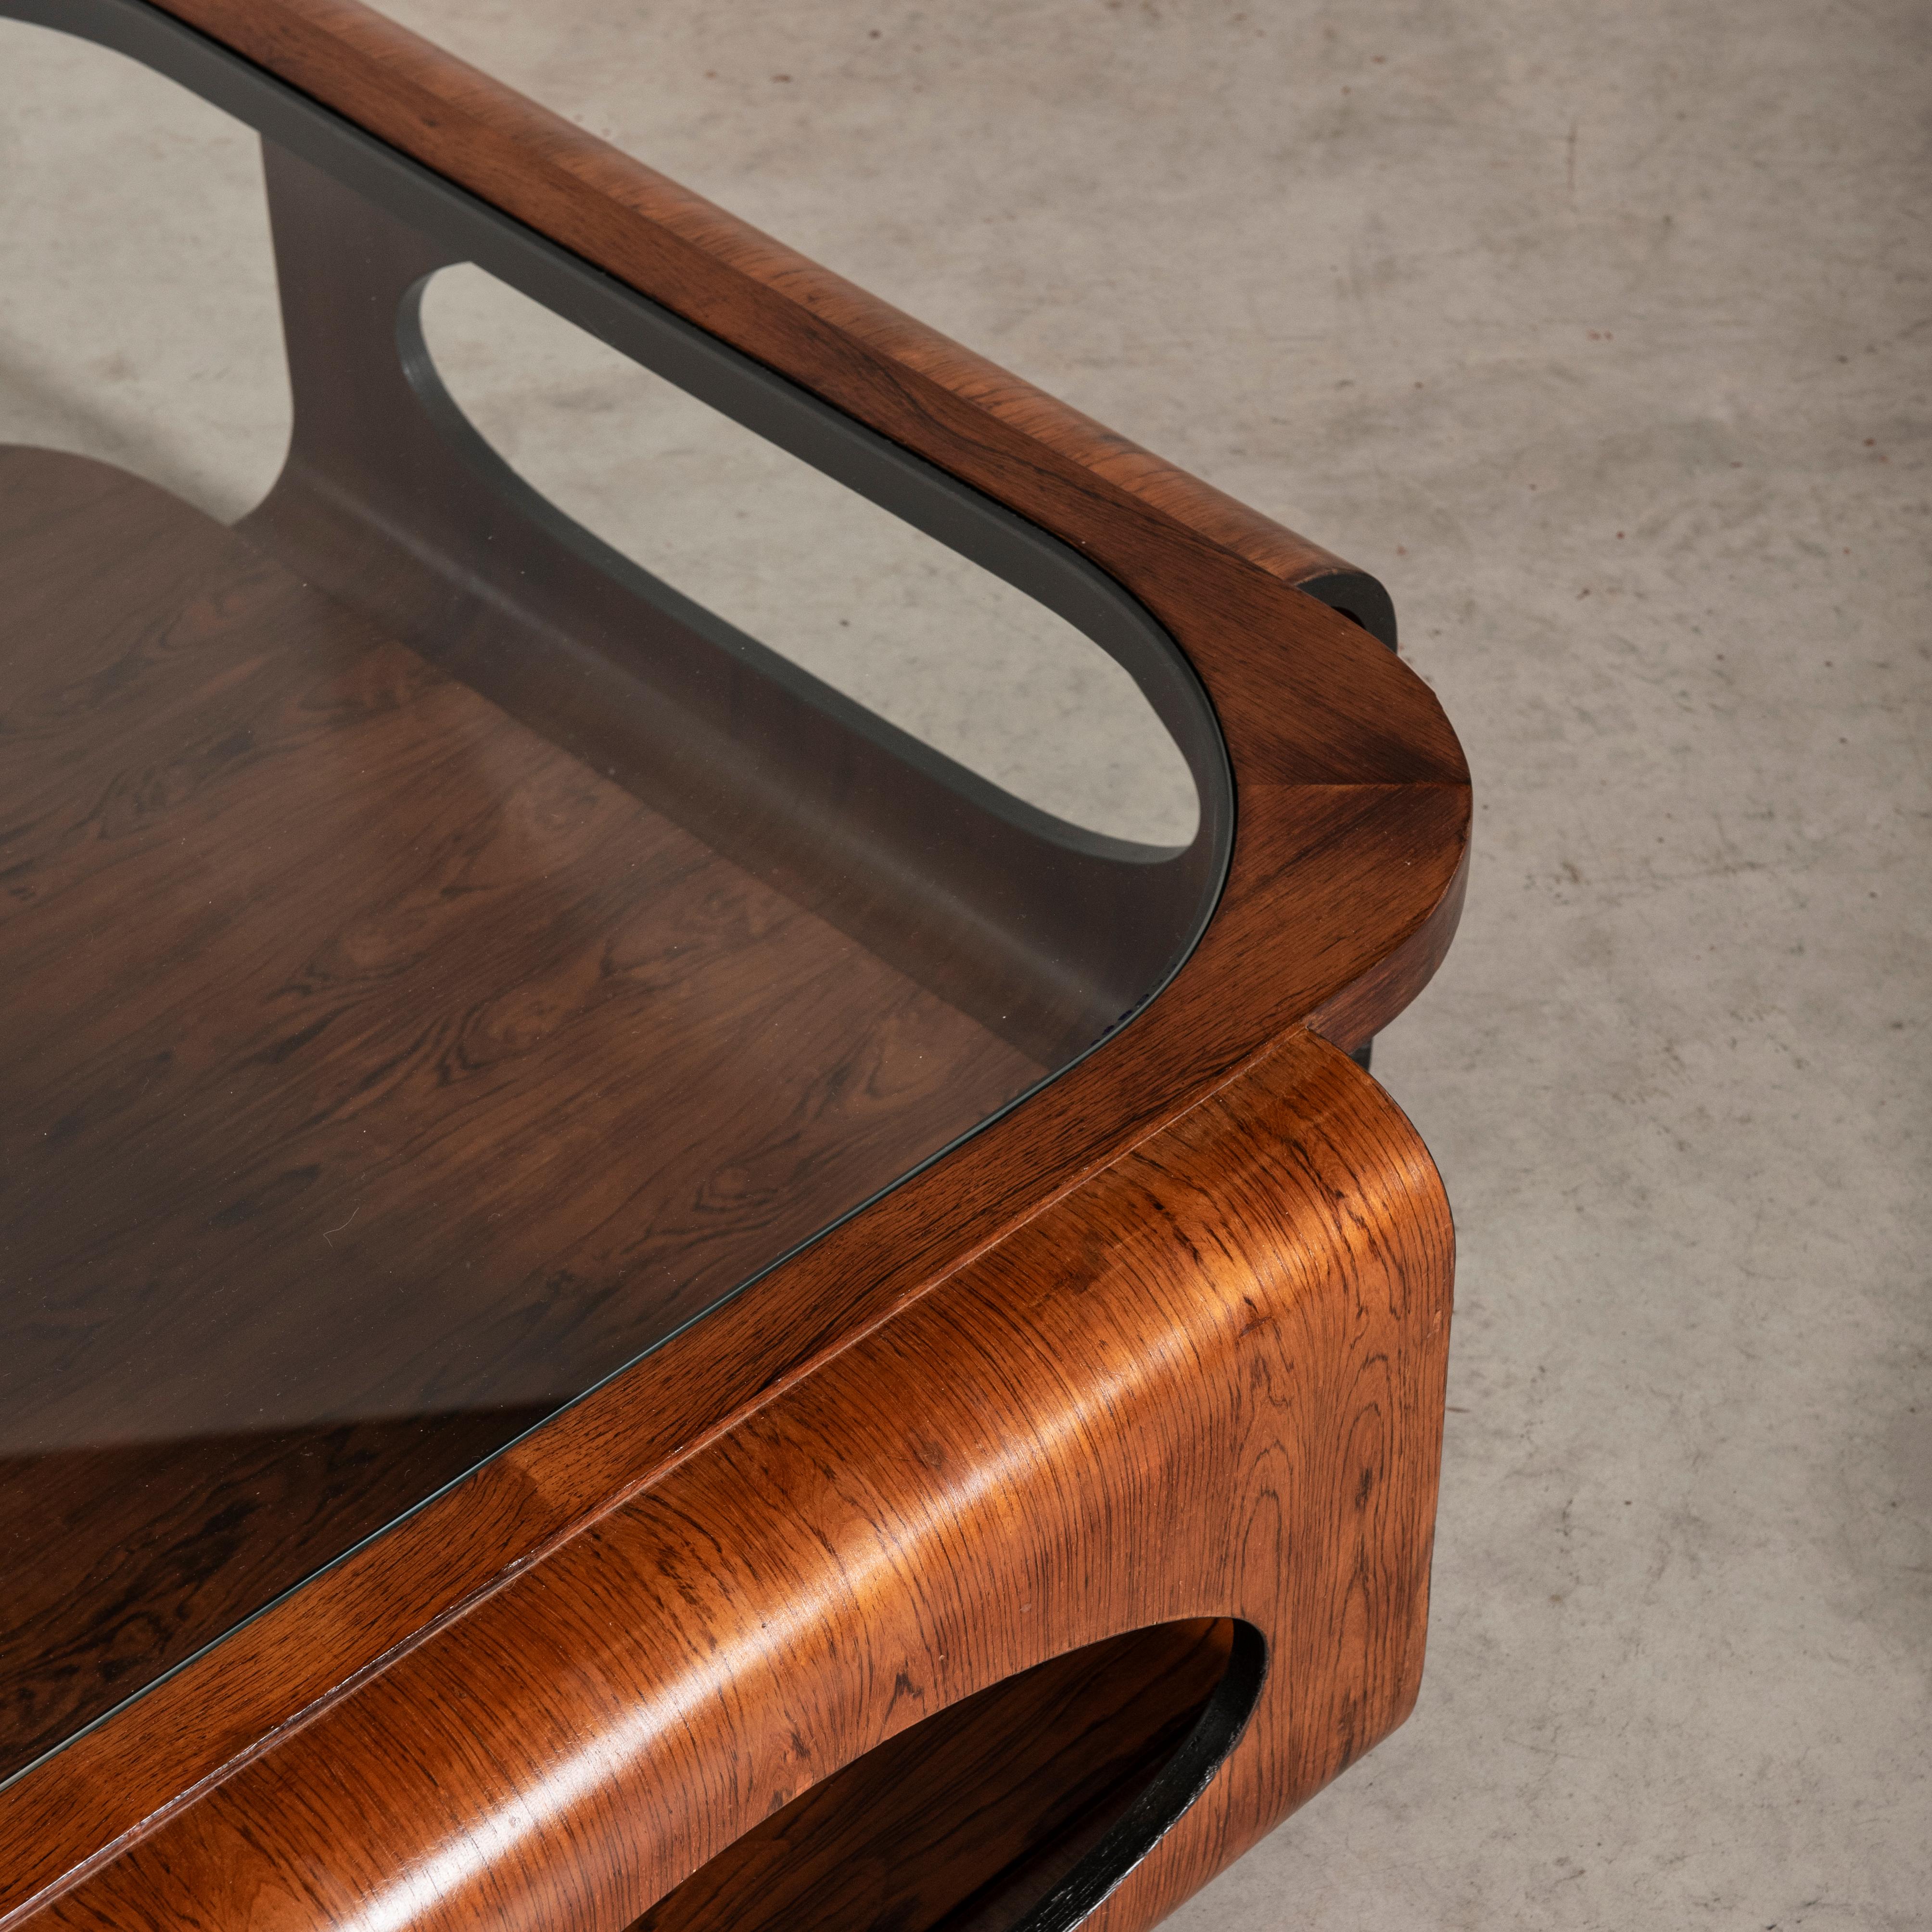 Hardwood Center Table in Wood and Glass, by Móveis Bertomeu, Mid-Century Modern Design For Sale